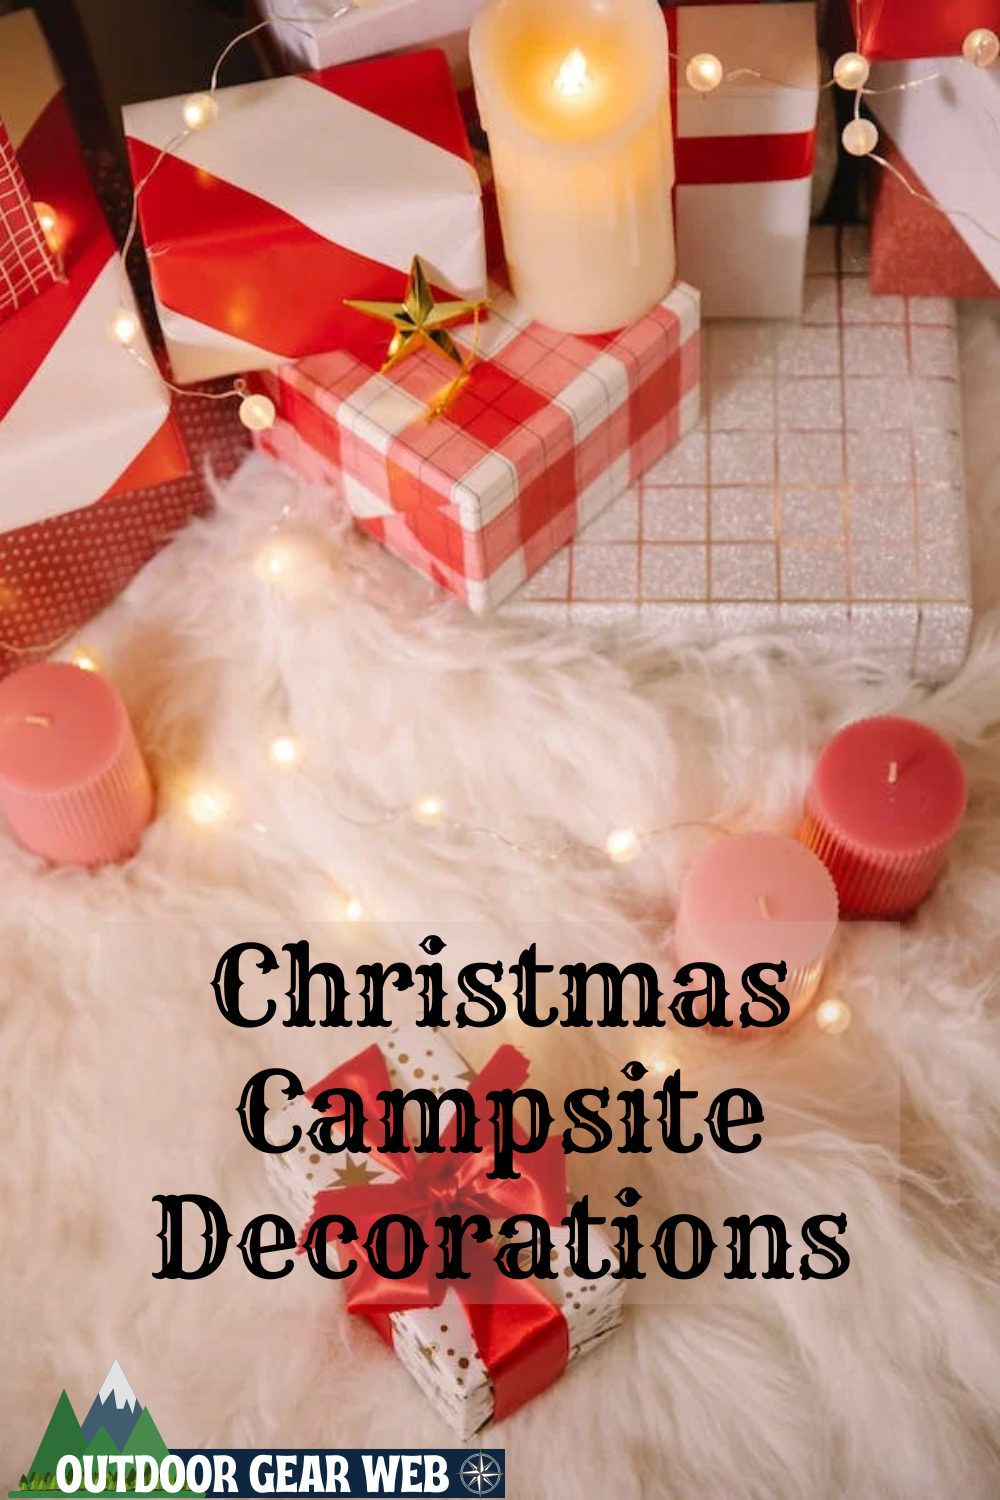 Christmas Campsite Decorations Outdoors, Nature, Hunting, and Camping